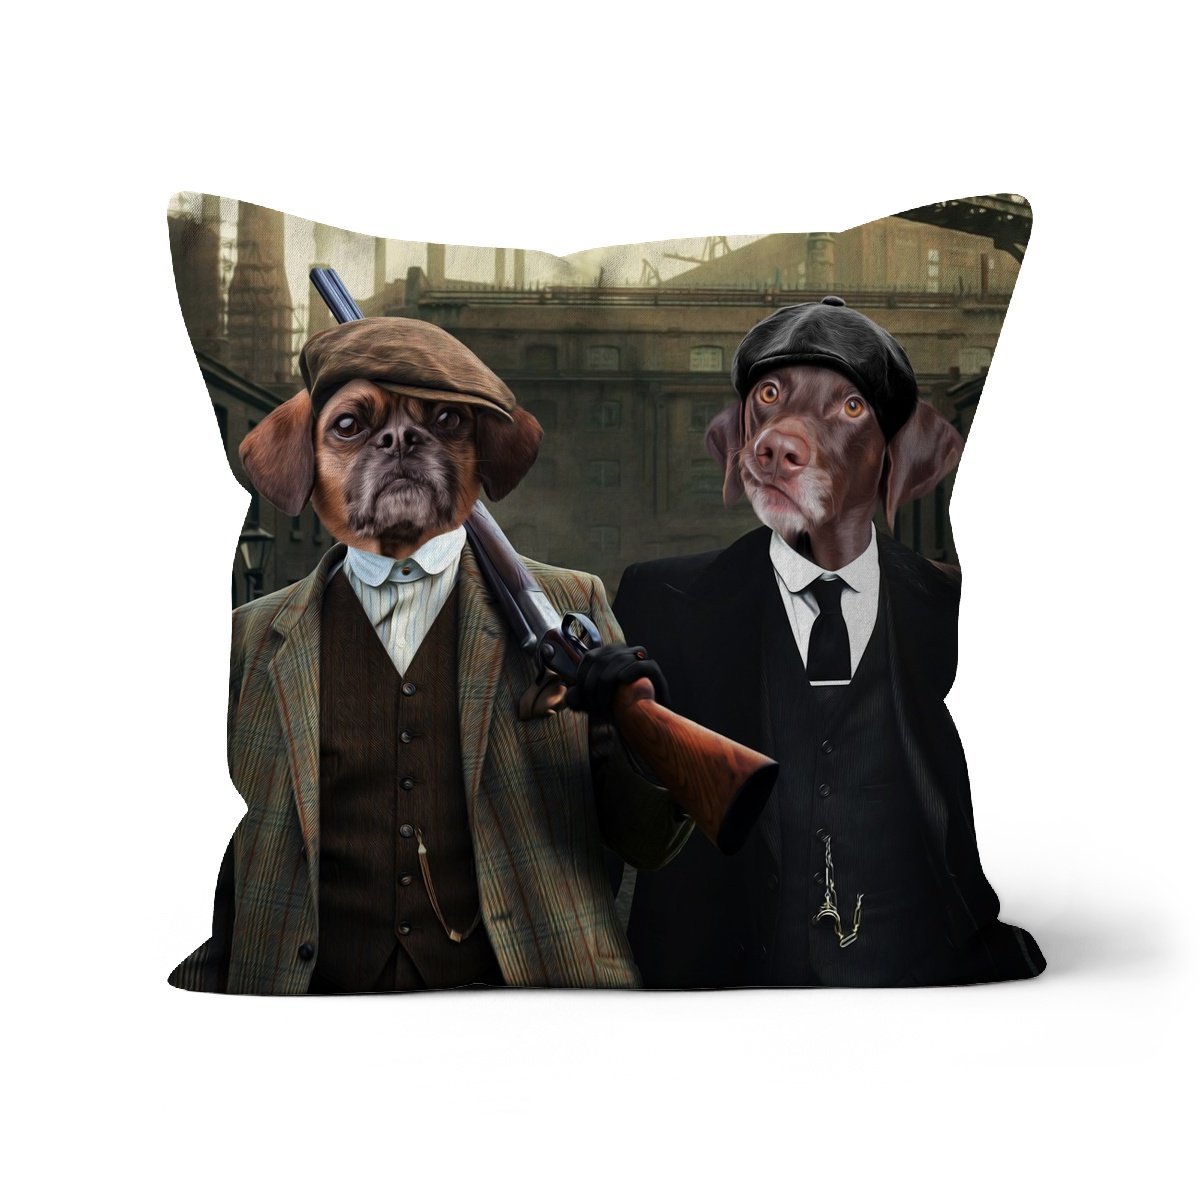 The 2 Brothers (Peaky Blinders Inspired): Custom Pet Cushion - Paw & Glory - #pet portraits# - #dog portraits# - #pet portraits uk#pawandglory, pet art pillow,dog on pillow, custom cat pillows, pet pillow, custom pillow of pet, pillow personalized